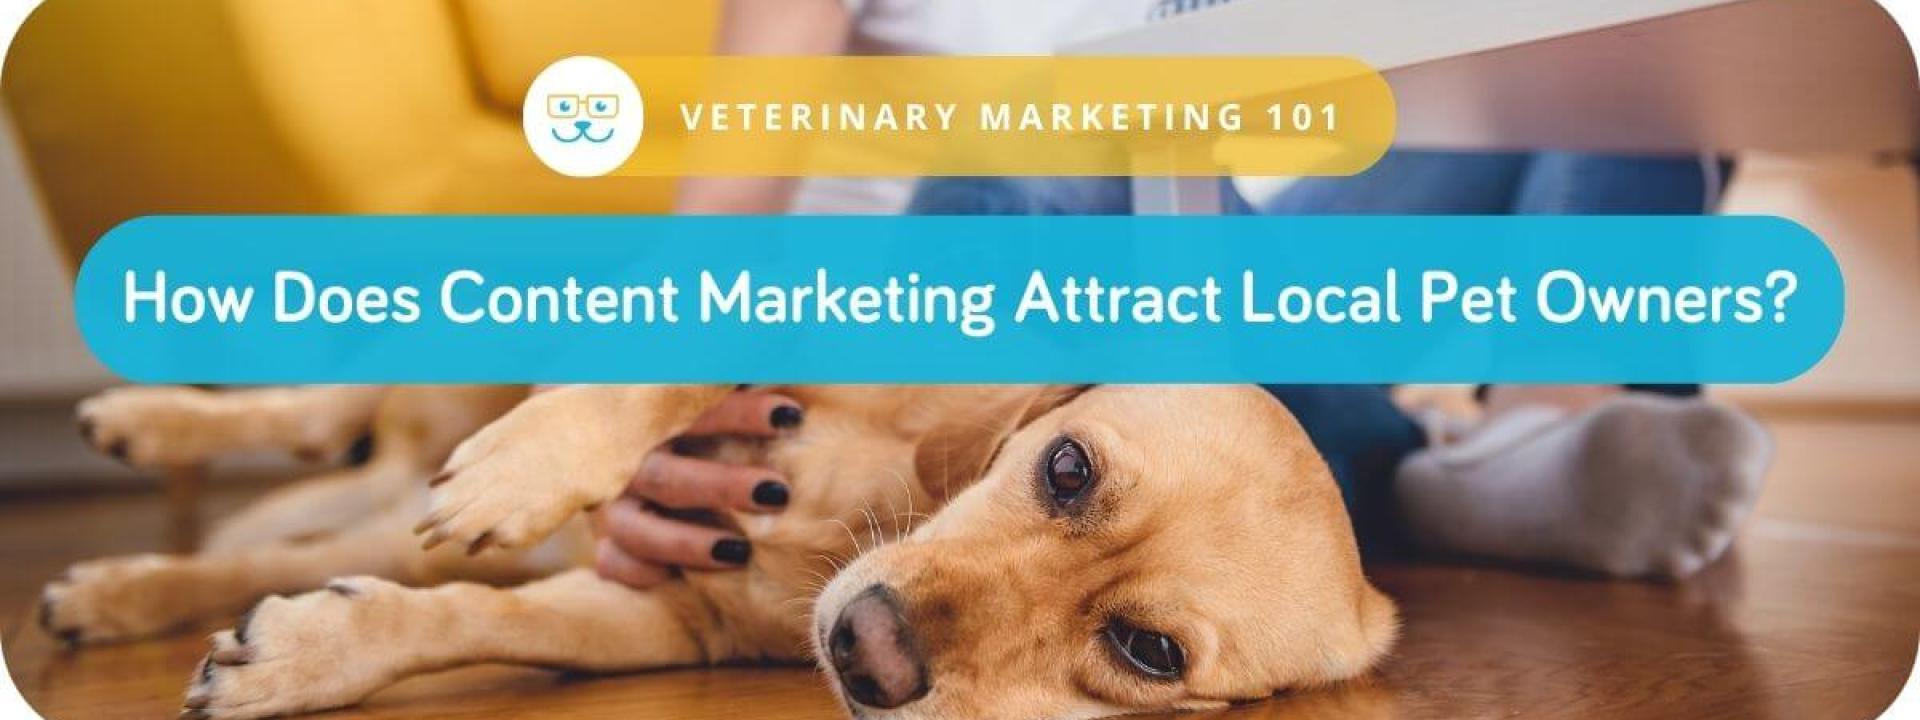 Veterinary Marketing 101: How Does Content Marketing Attract Local Pet Owners?